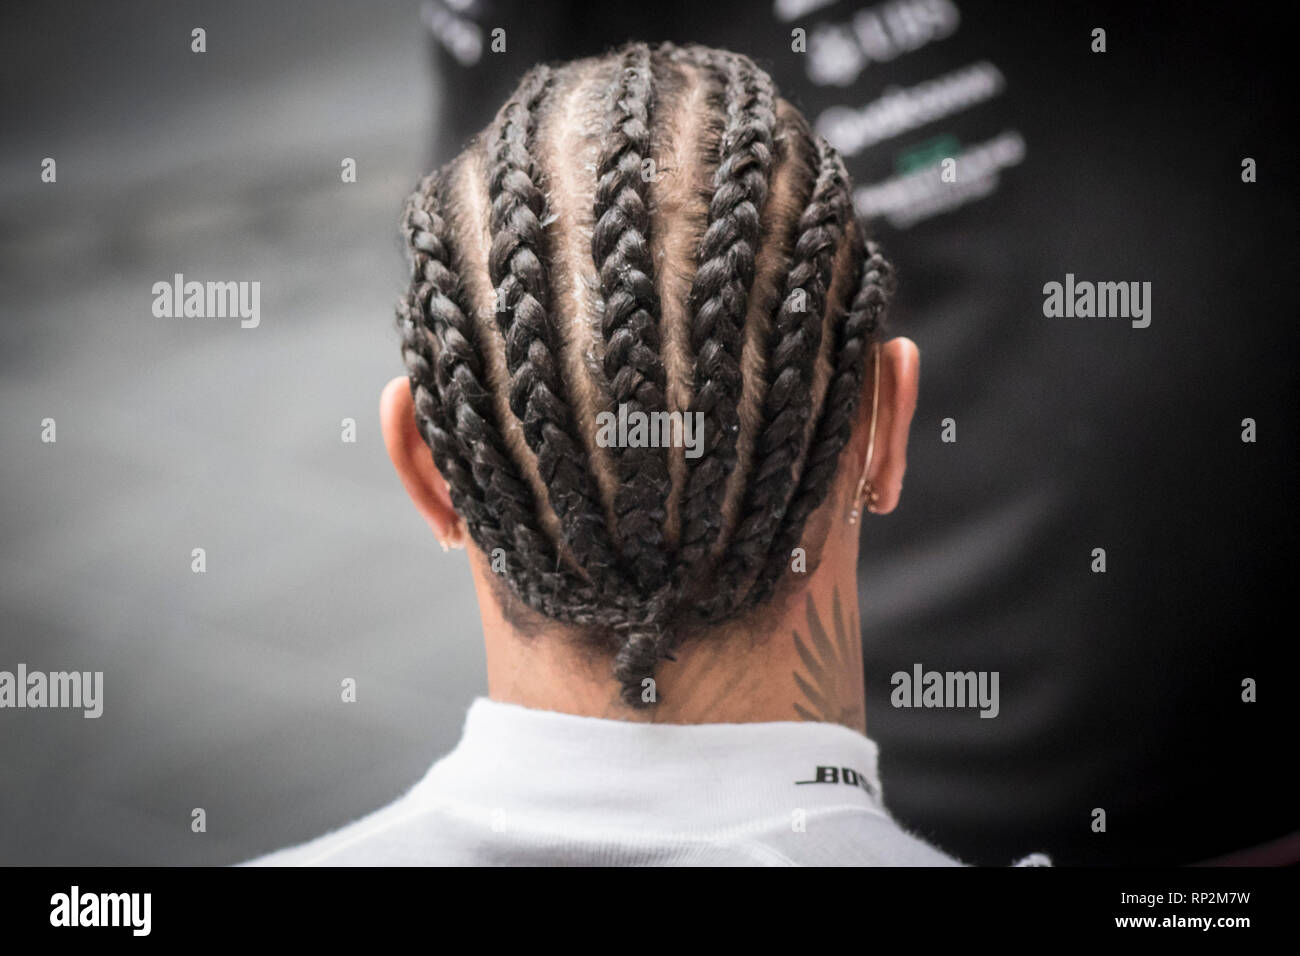 Barcelona, Spain. 20th Feb, 2019.  Lewis Hamilton  hairstyle in the Paddock area  at the Circuit de Catalunya in Montmelo (Barcelona province) during the pre-season testing session. Credit:  Jordi Boixareu/Alamy Live News Stock Photo